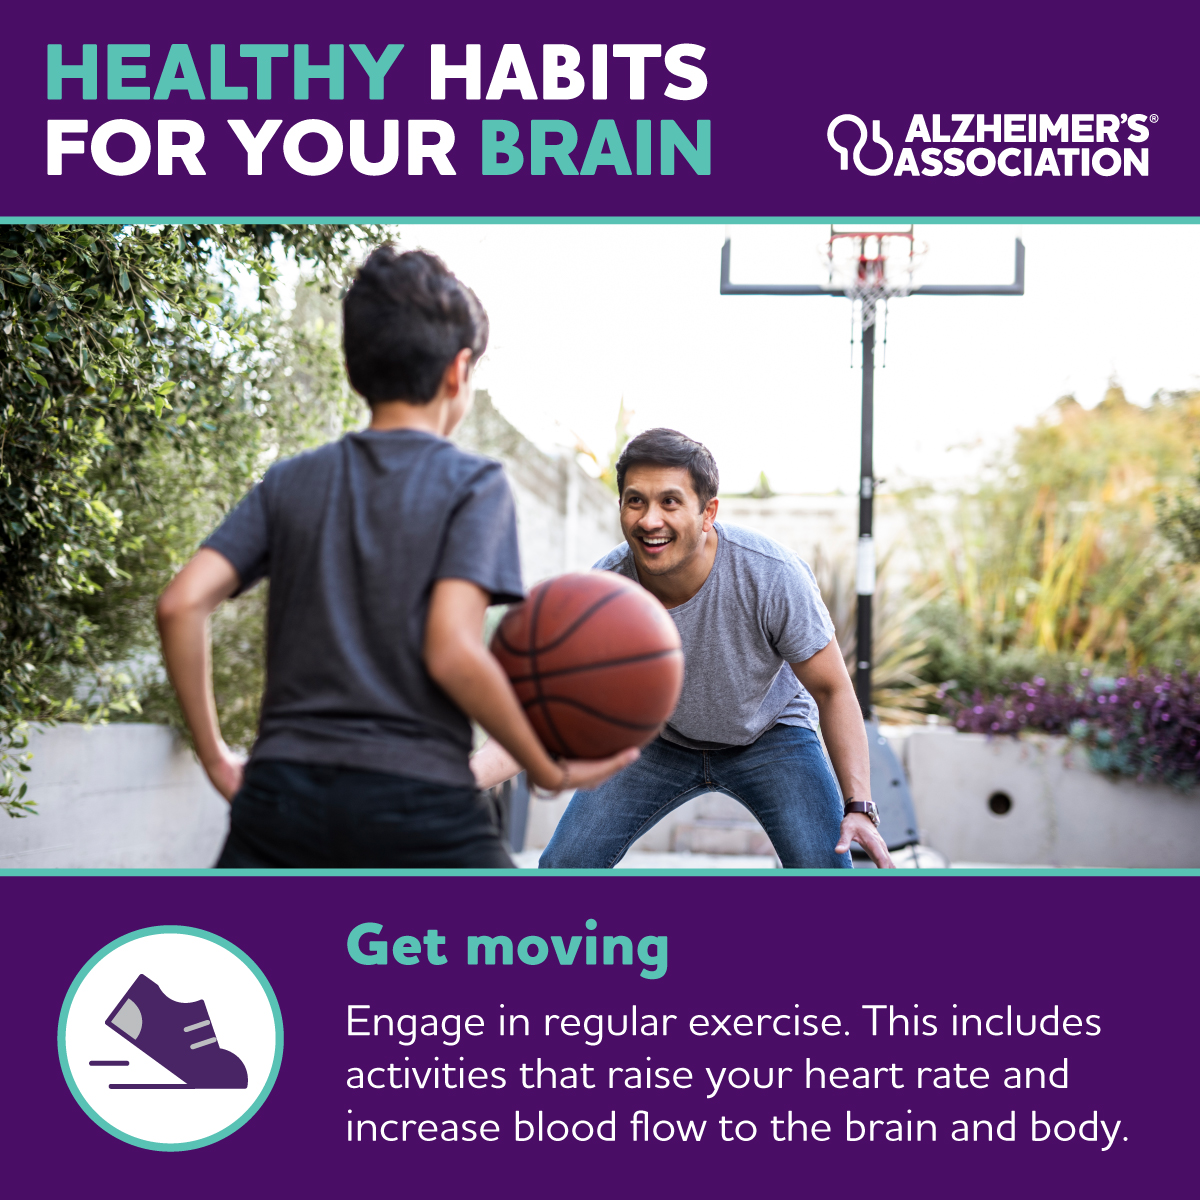 Did you know that engaging in regular exercise is important for your brain health? In honor of #NationalExerciseDay, commit to building more movement into your day in a way that works best for you! 👟 Get more healthy habits for your brain at alz.org/healthyhabits.